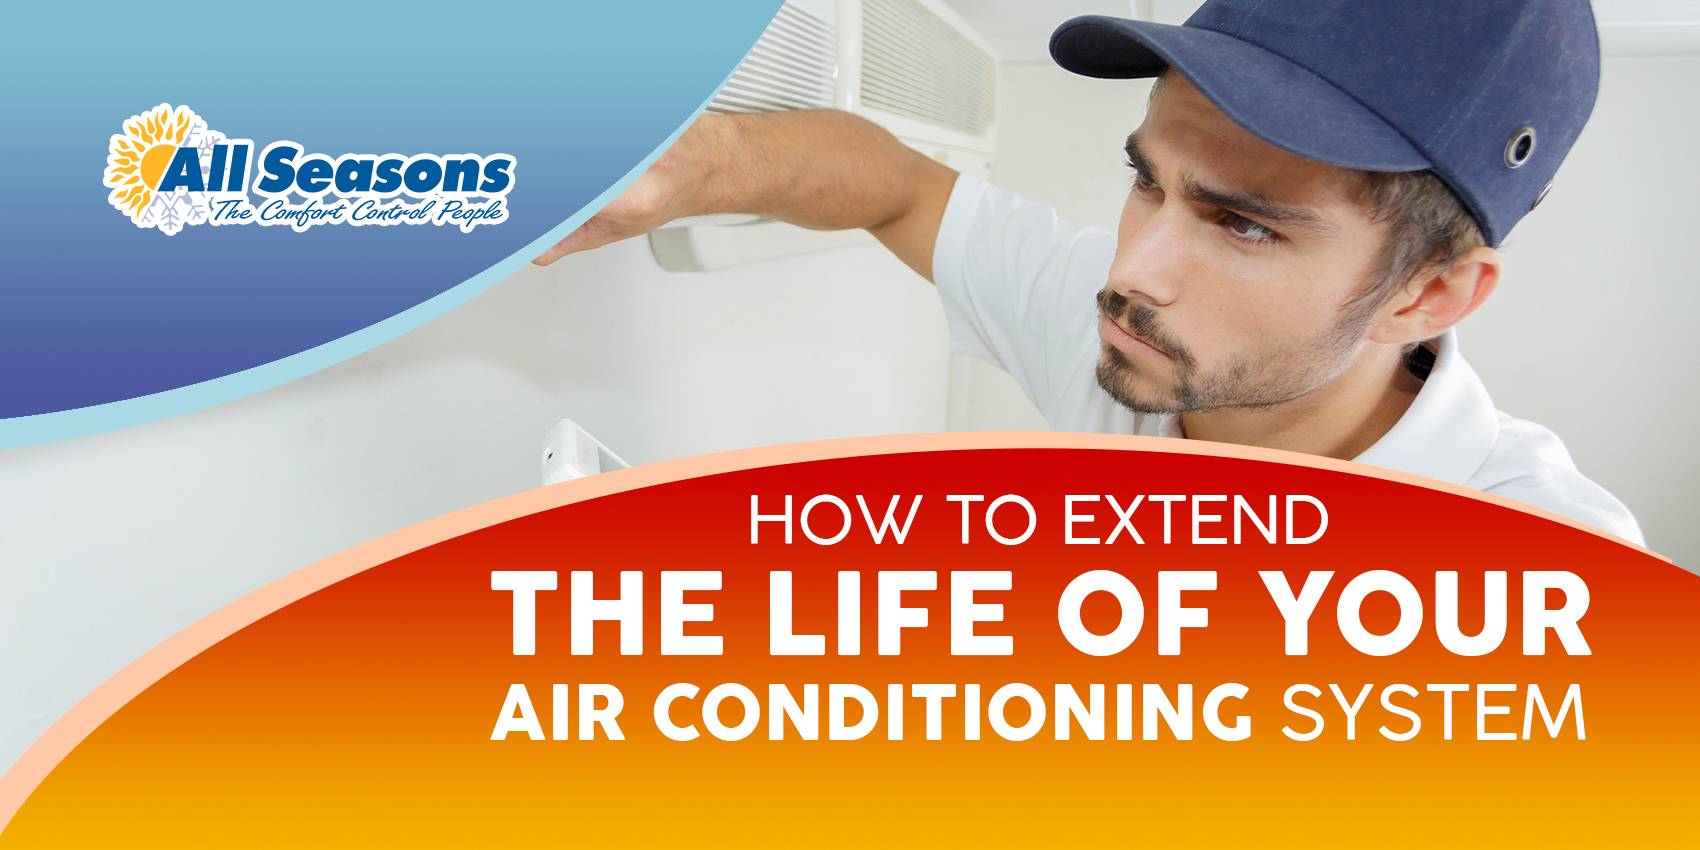 How To Extend the Life Of Your Air Conditioning System